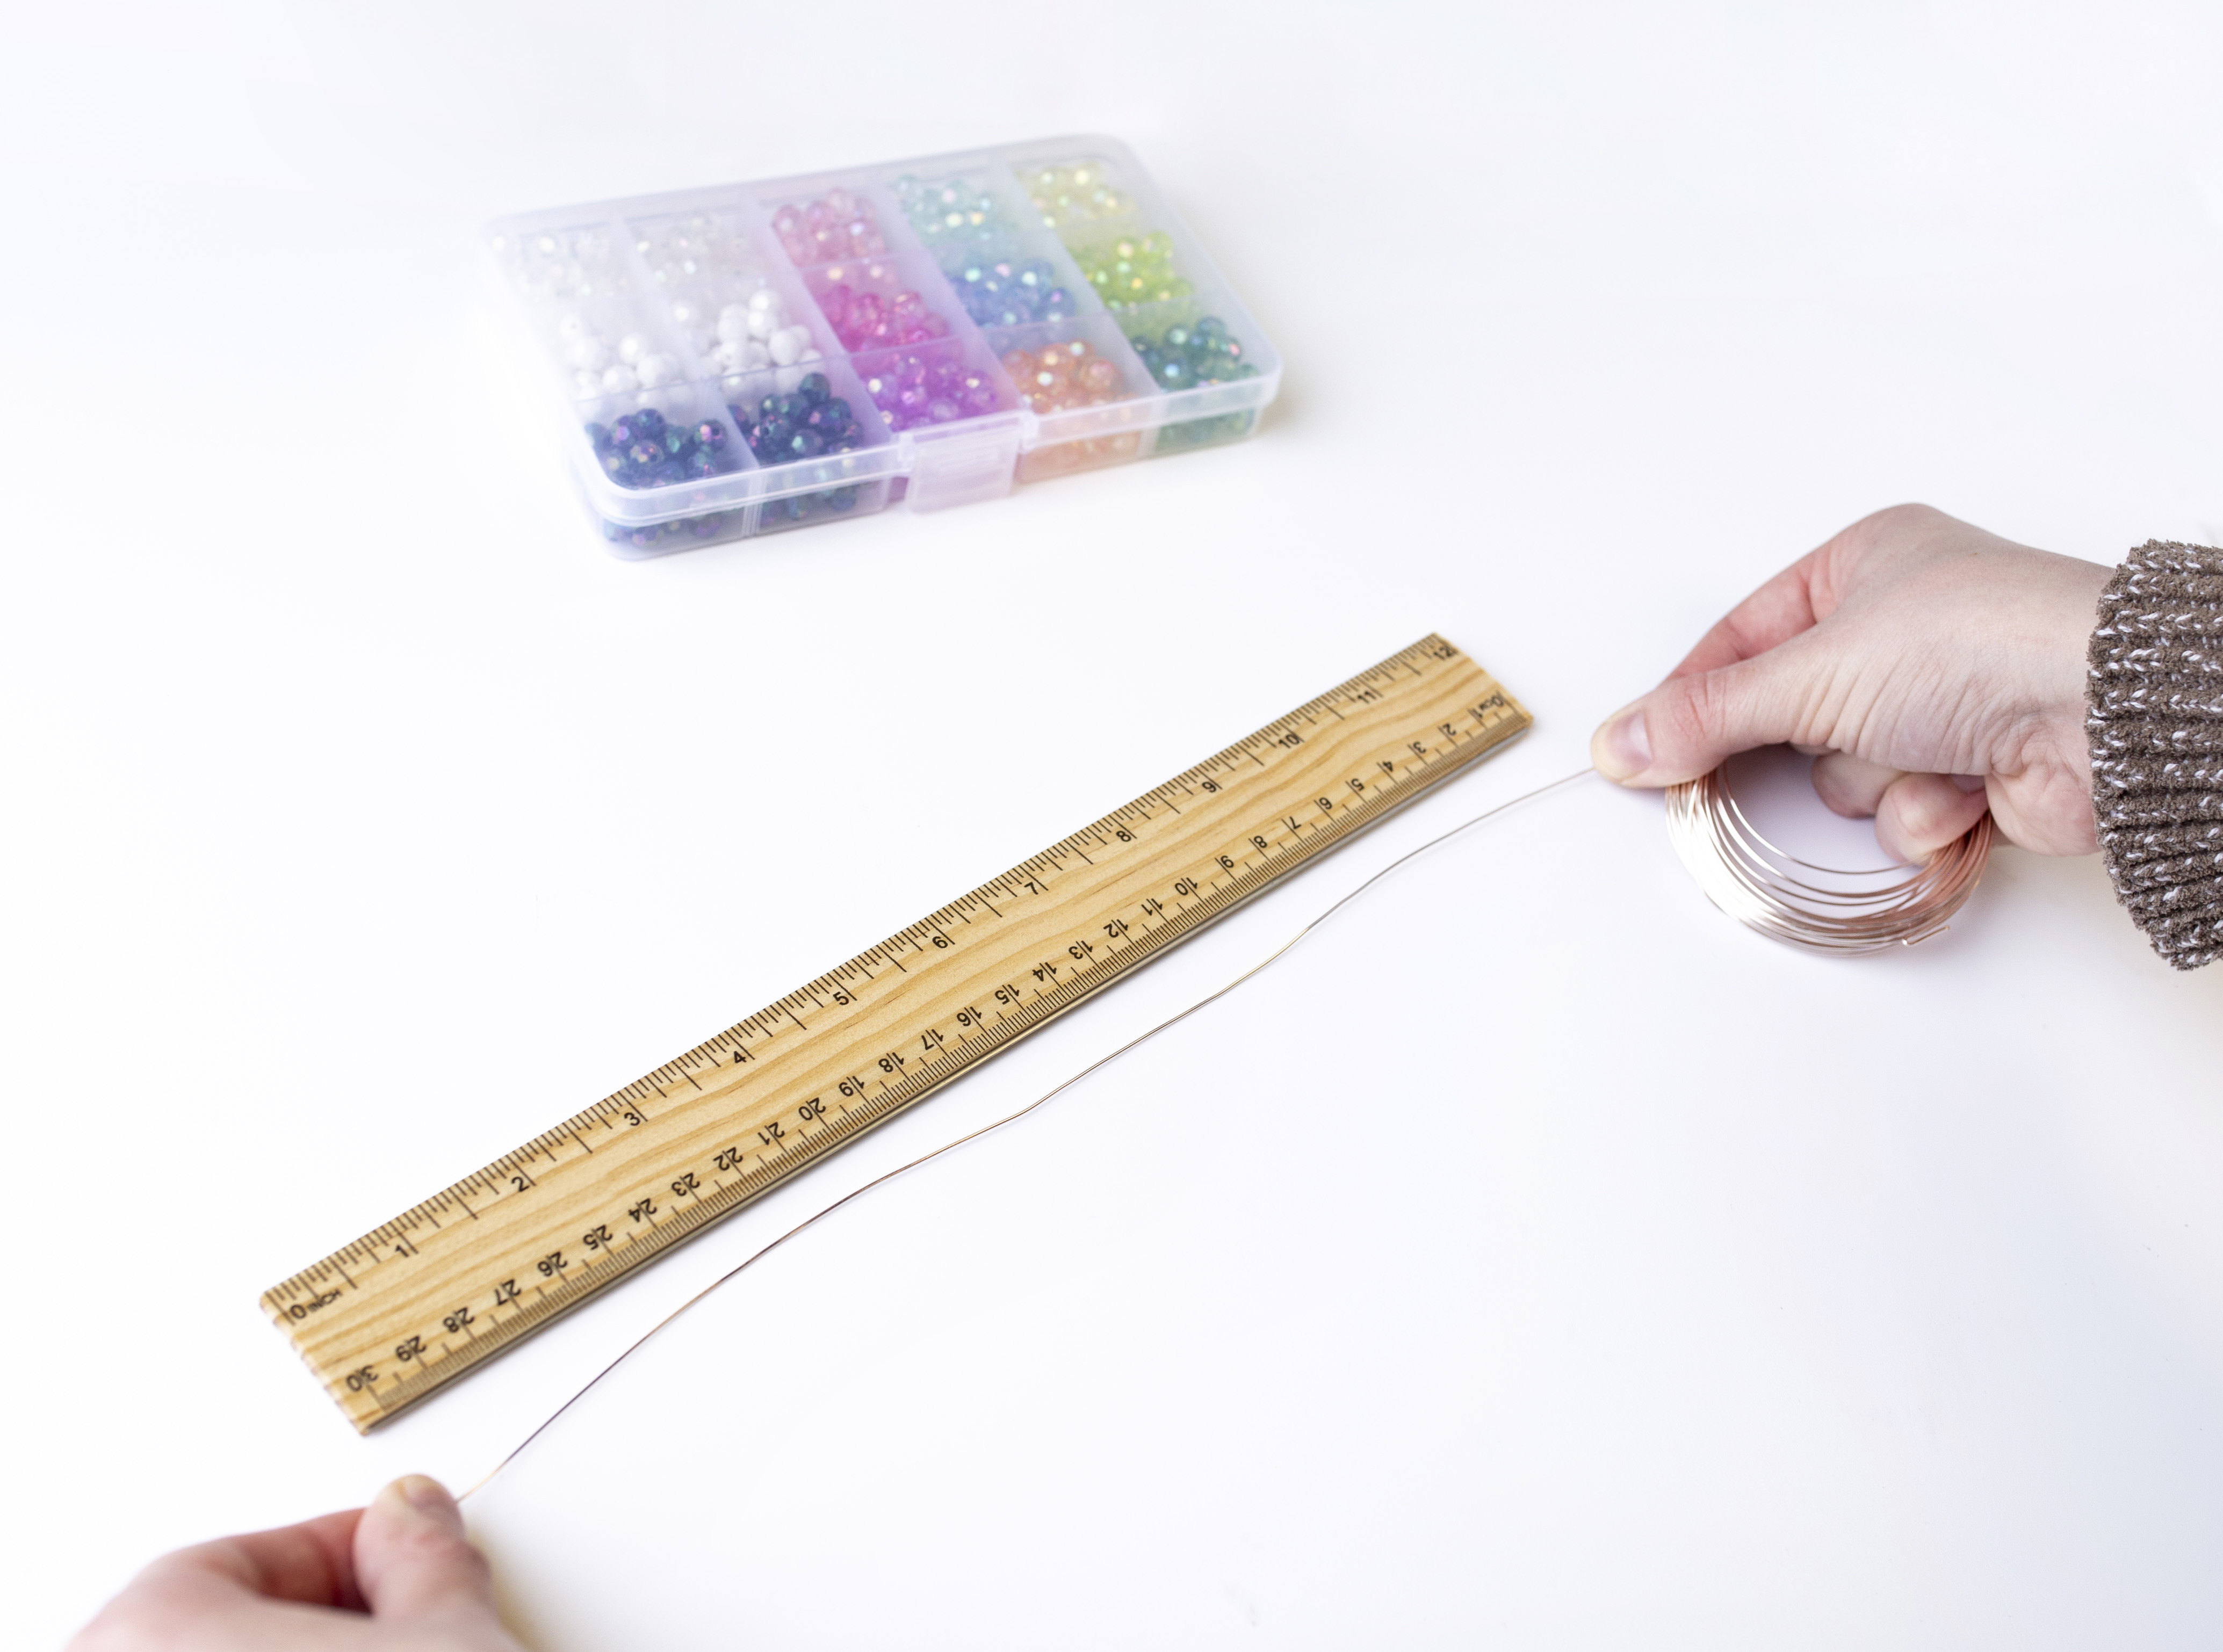 ruler and wire measurement